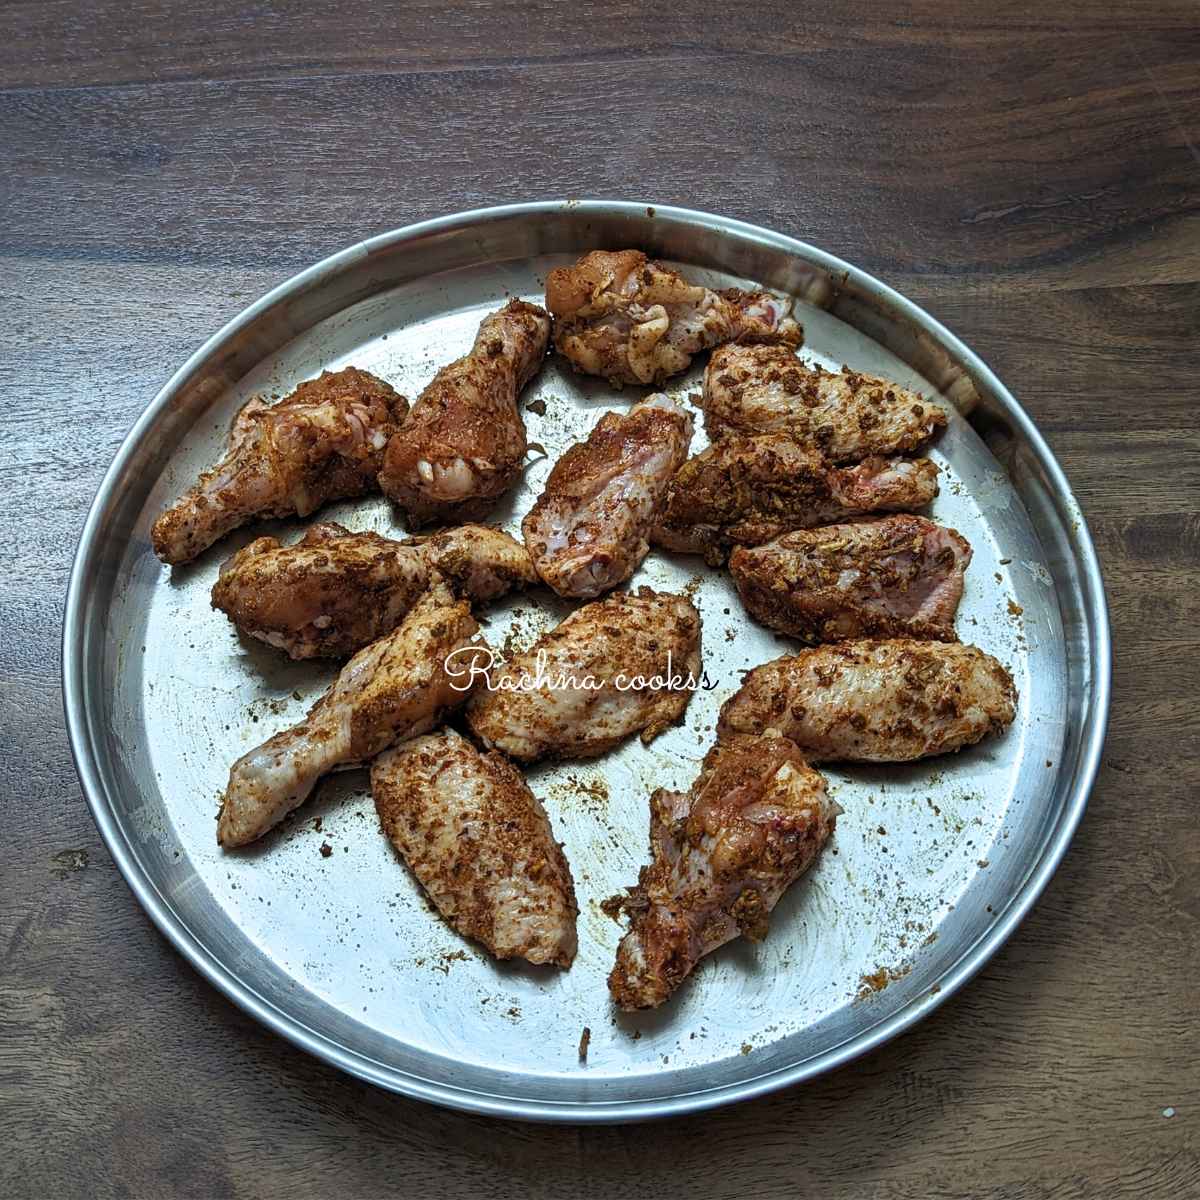 Wings coated with spice mix